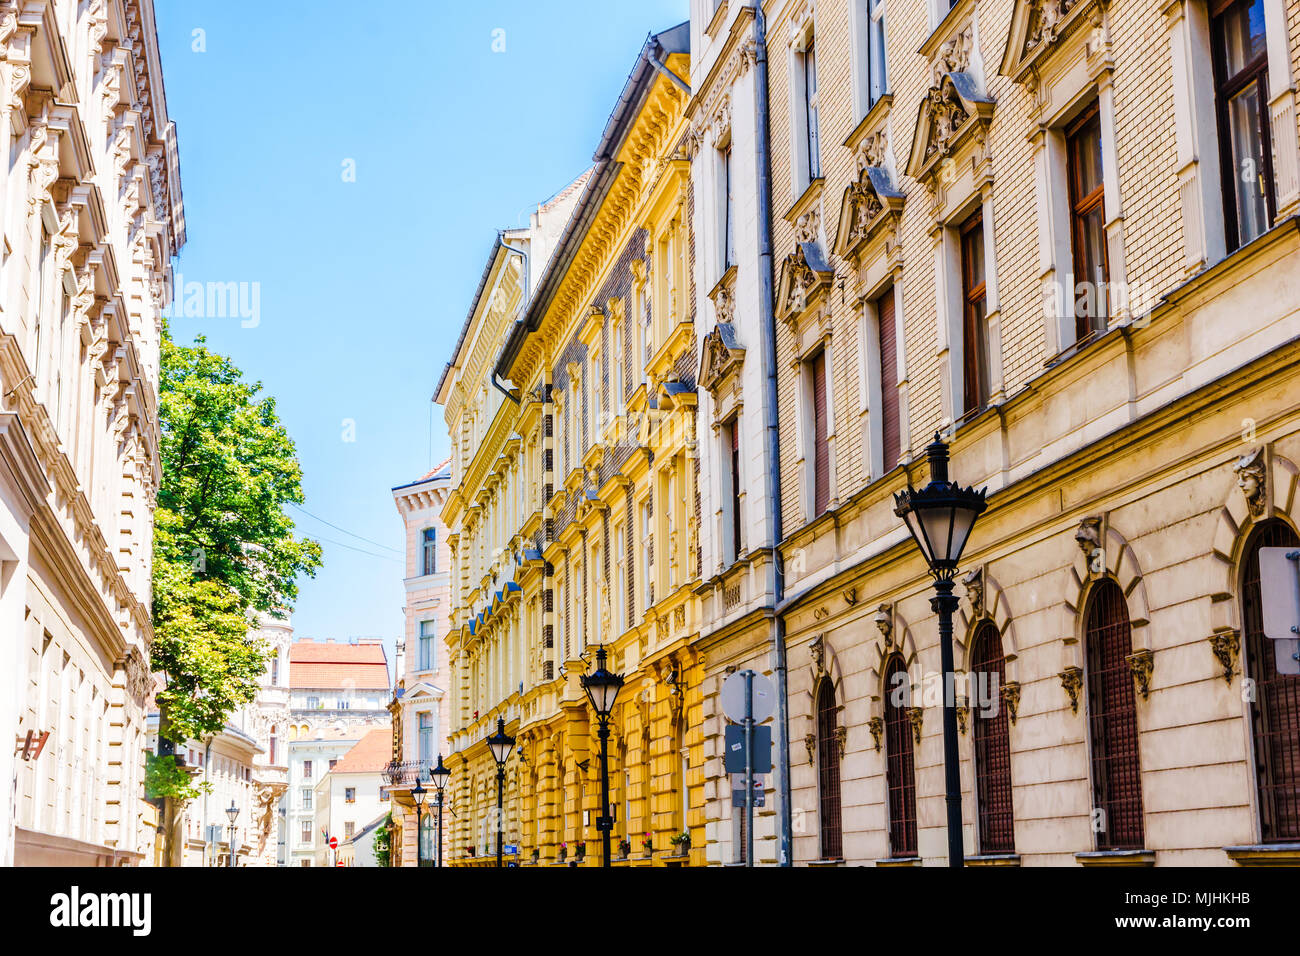 View on art nouveau buildings in the old town of Budapest - Hungary Stock Photo